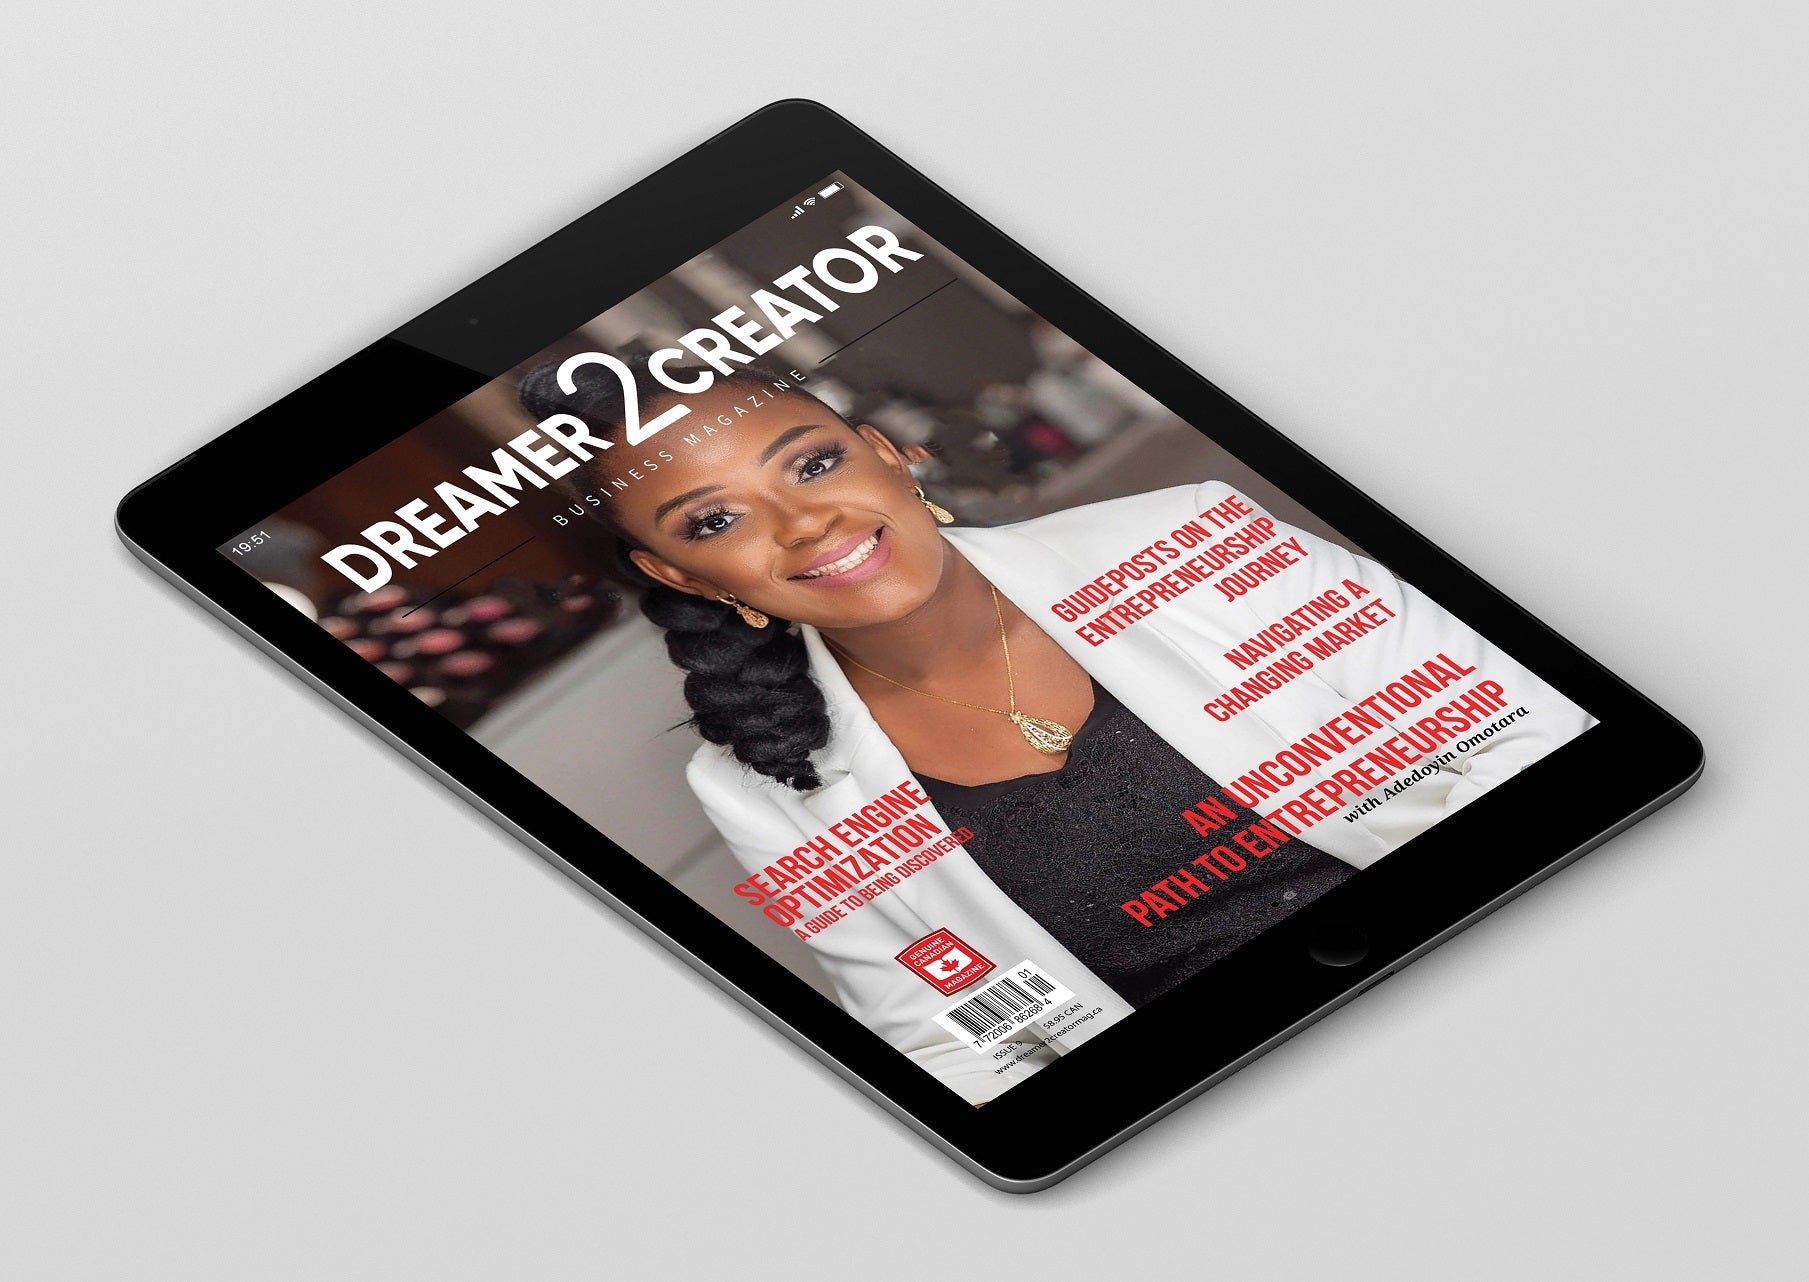 Issue 9 Digital version of Dreamer 2 Creator Business Magazine. Can be read on a tablet, phone or computer. A black Canadian small business lady on the cover